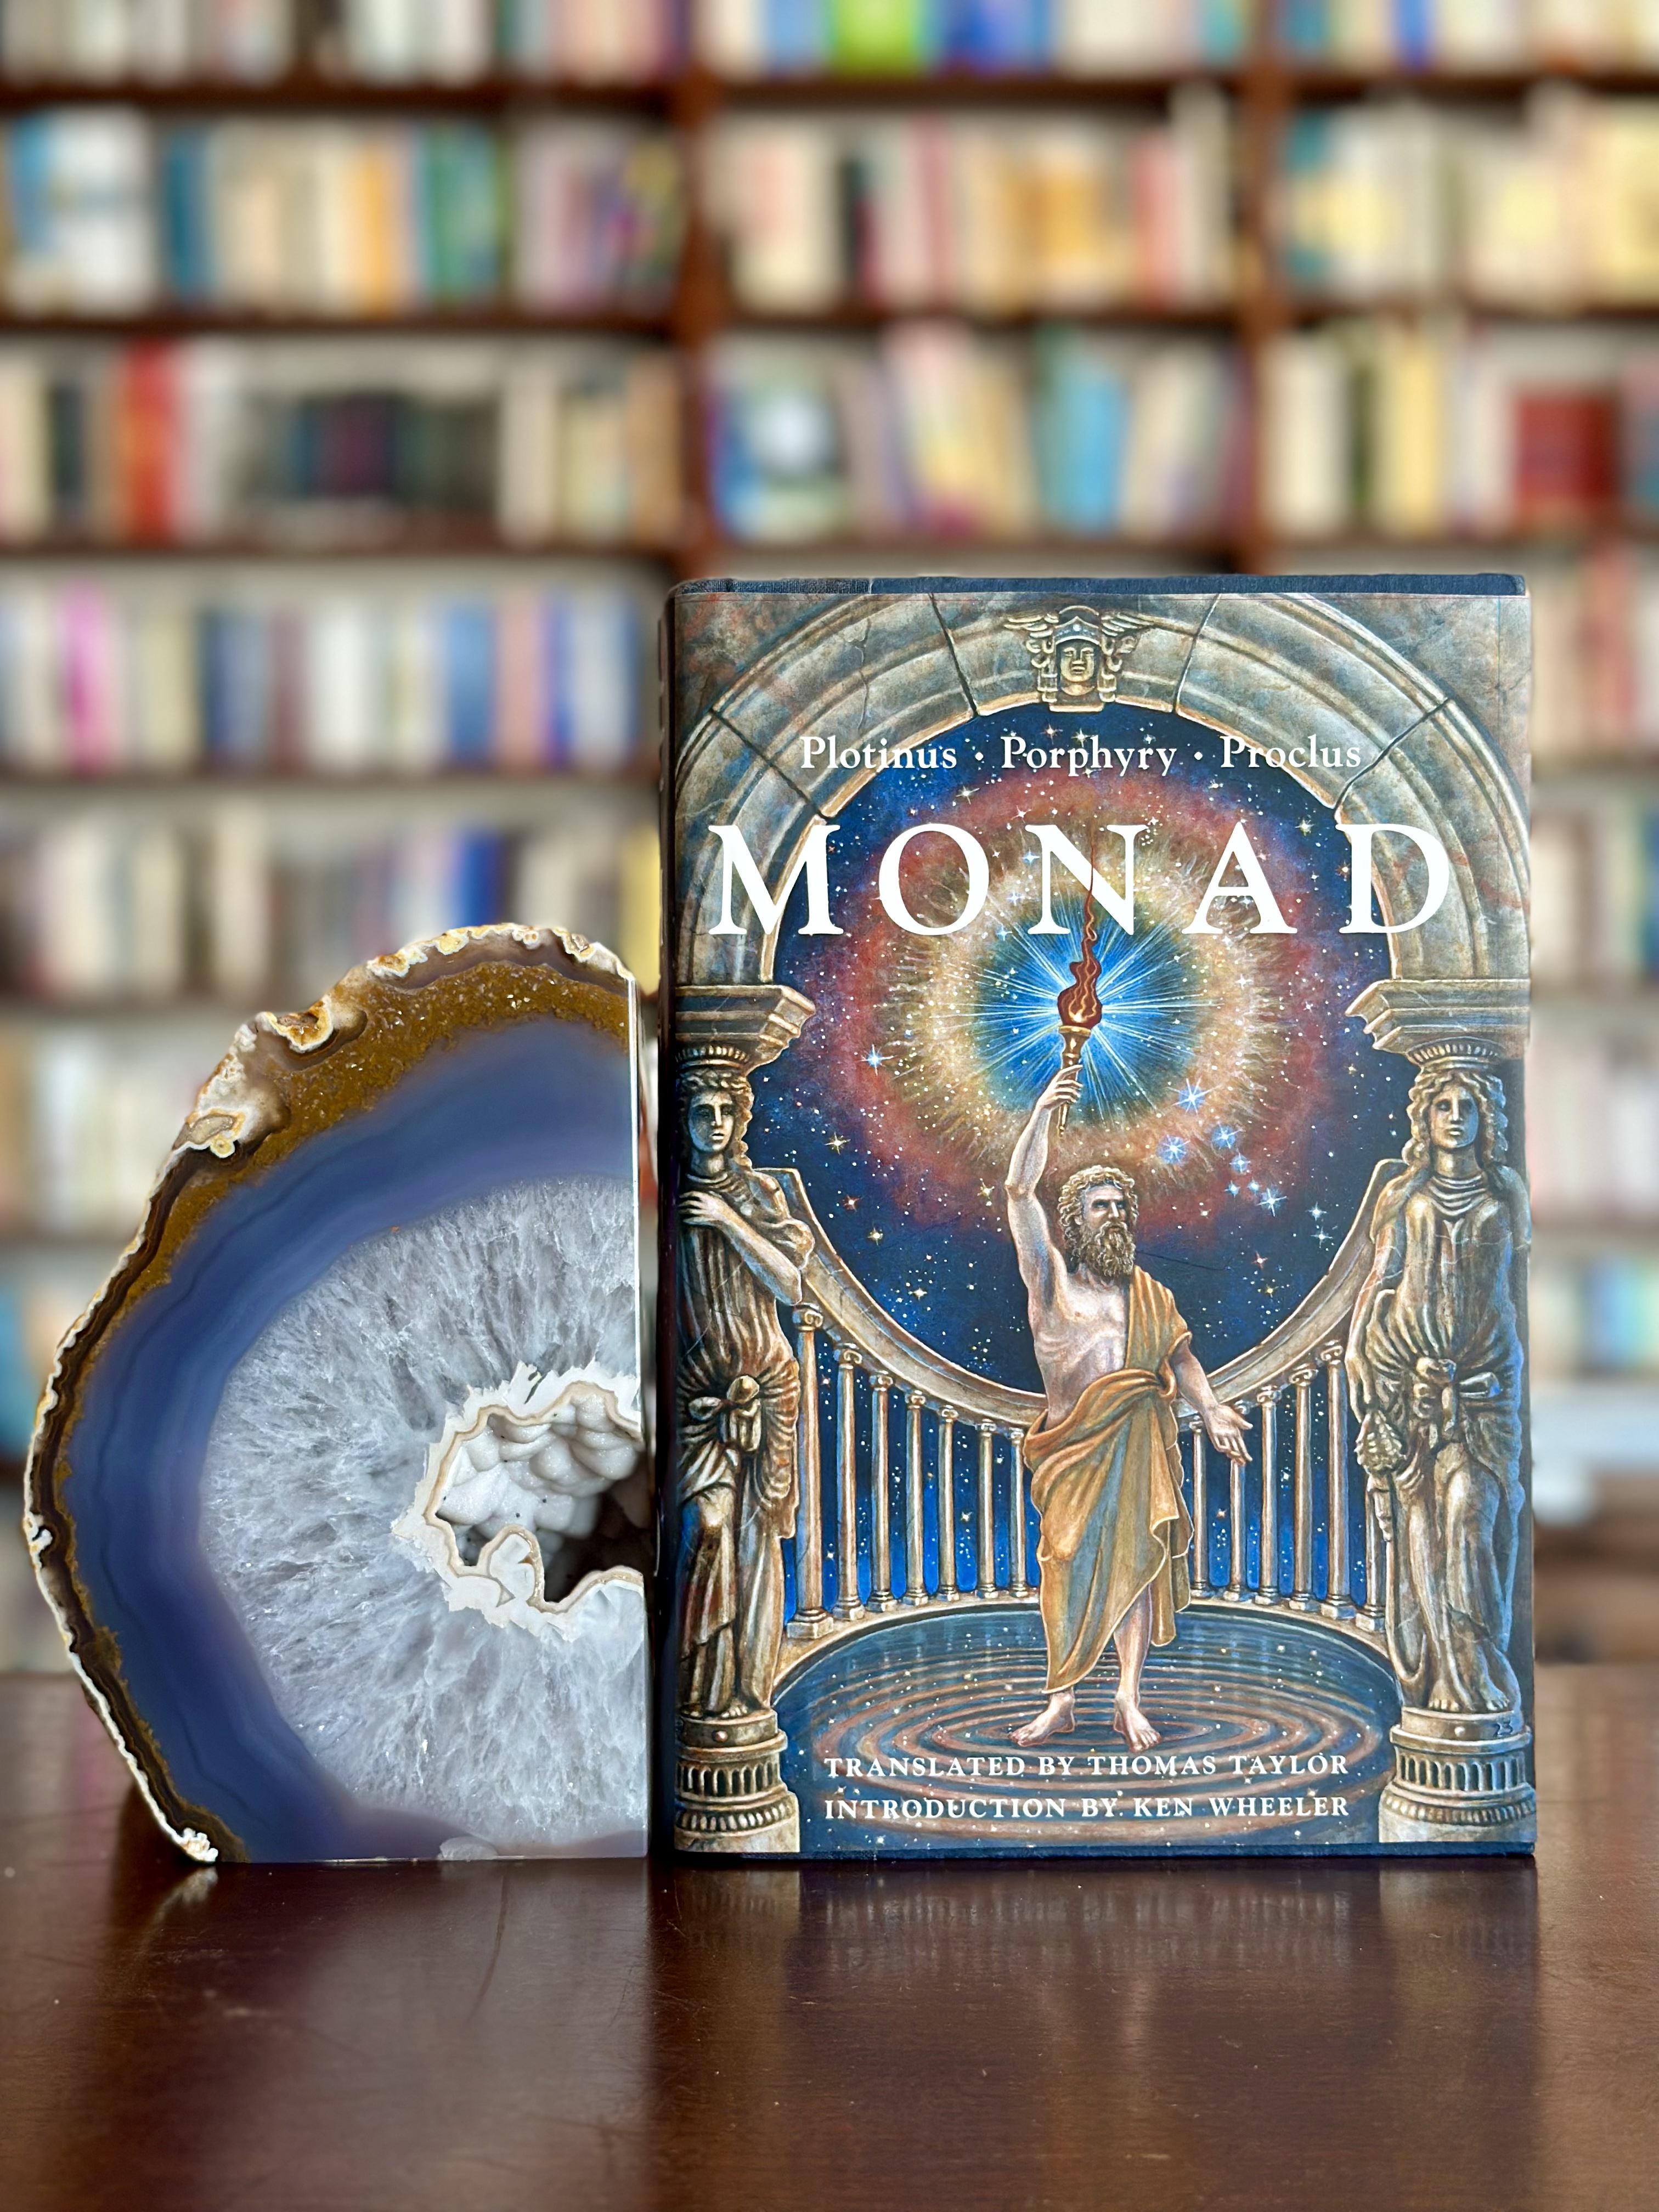 Gallowglass Books Breaks Ground with Debut Publication "MONAD": Featuring Works by Plotinus, Porphyry, and Proclus